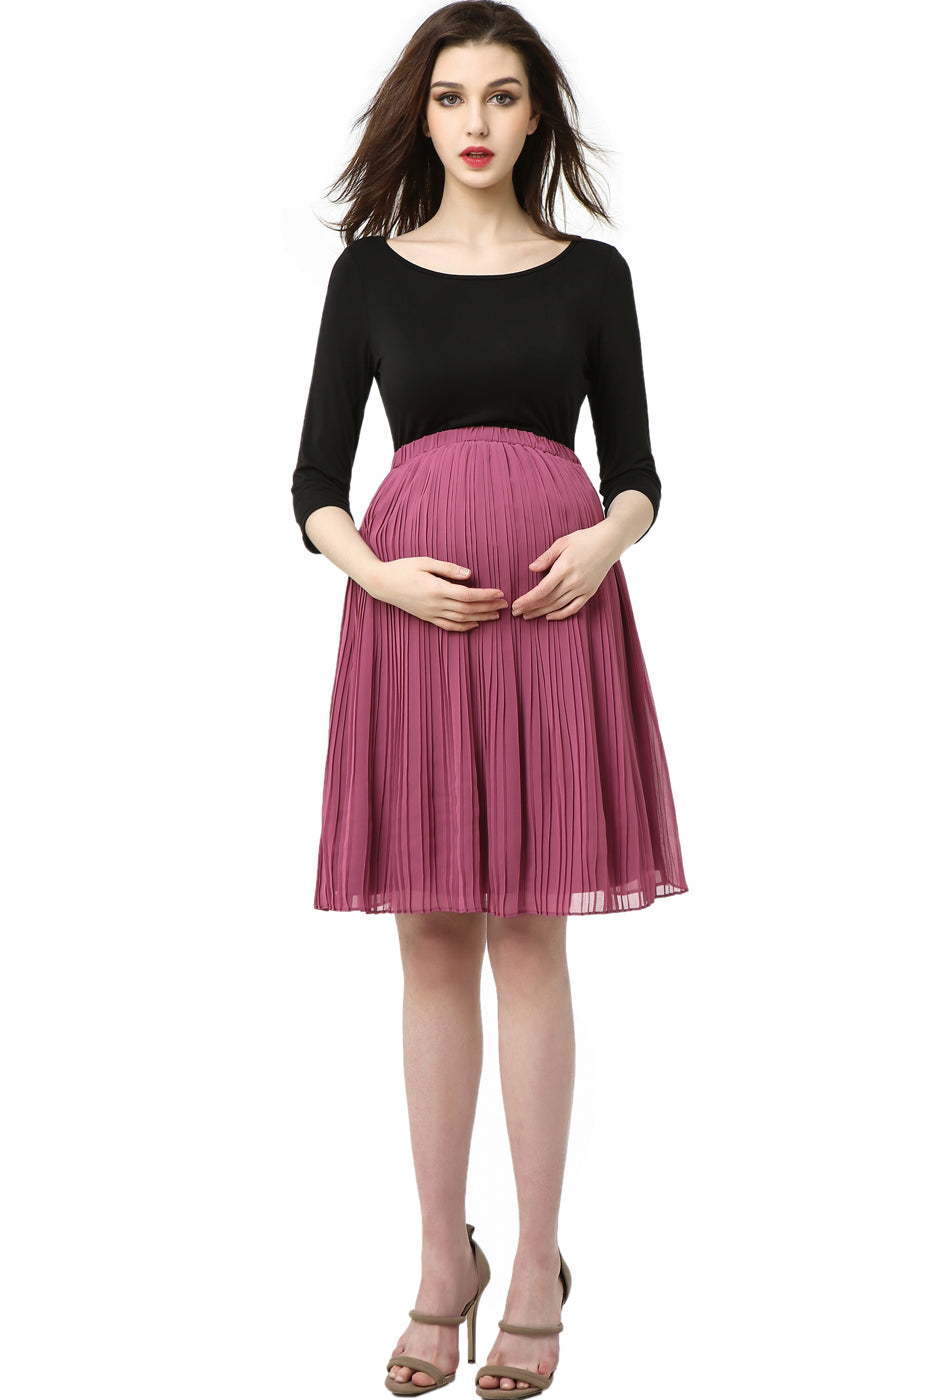 Eva - Miss Madison Boutique Maternity, Pregnancy Gowns, Dresses for  Photography, Photoshoot, Bridesmaid, Babyshower